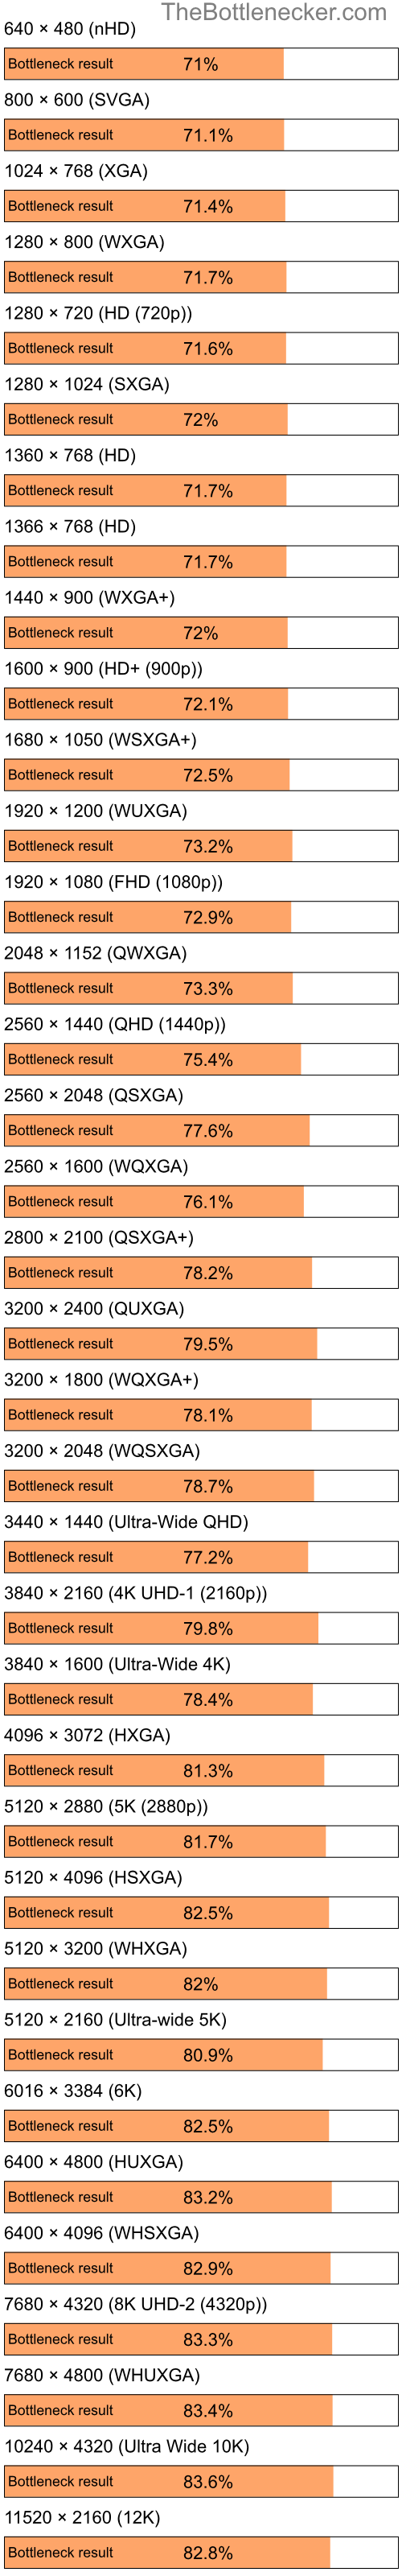 Bottleneck results by resolution for Intel Celeron and NVIDIA GeForce 8600M GT in Graphic Card Intense Tasks